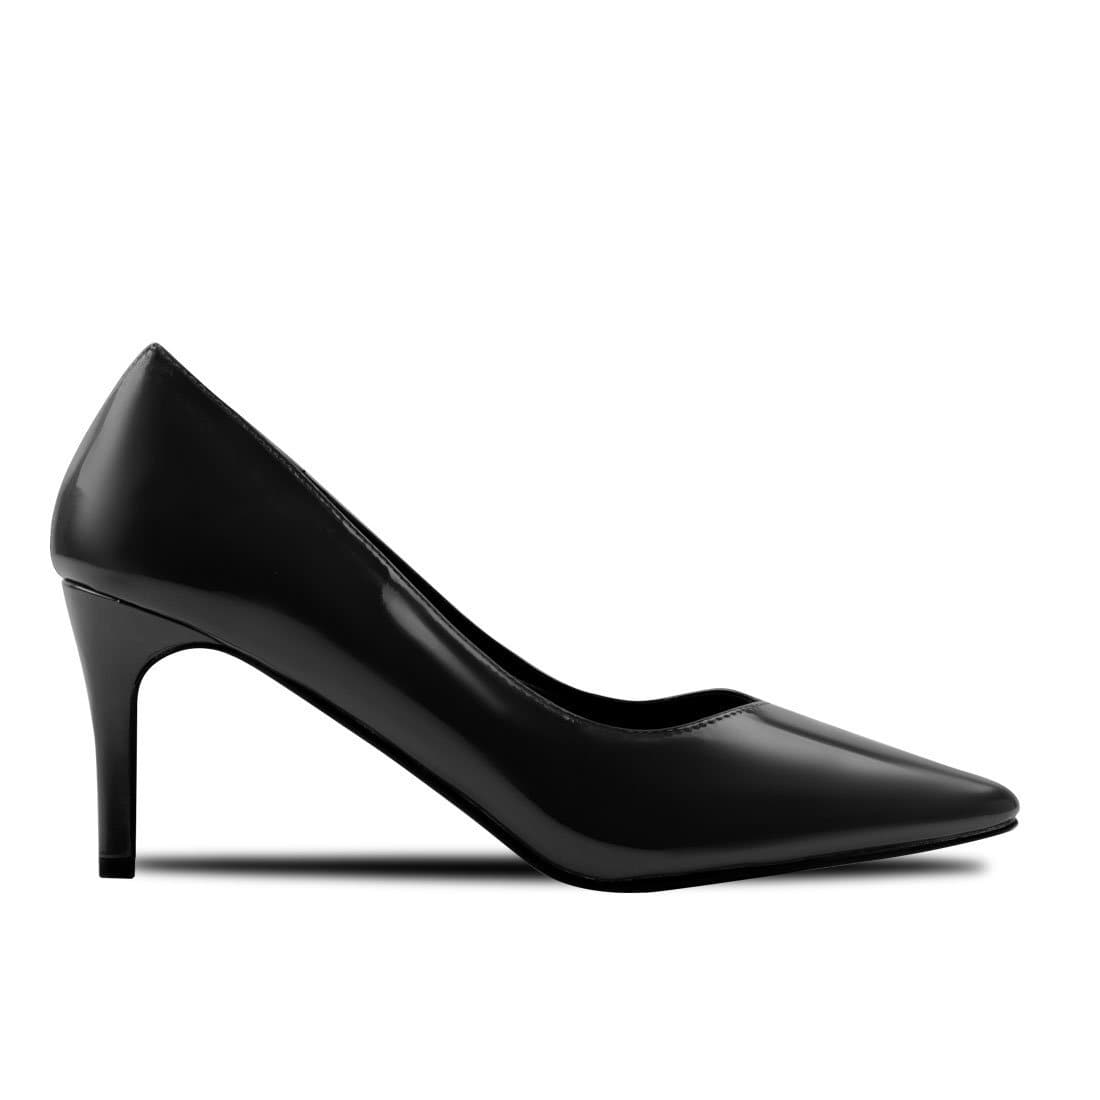 Heel Shoes Lina Patent Leather Black